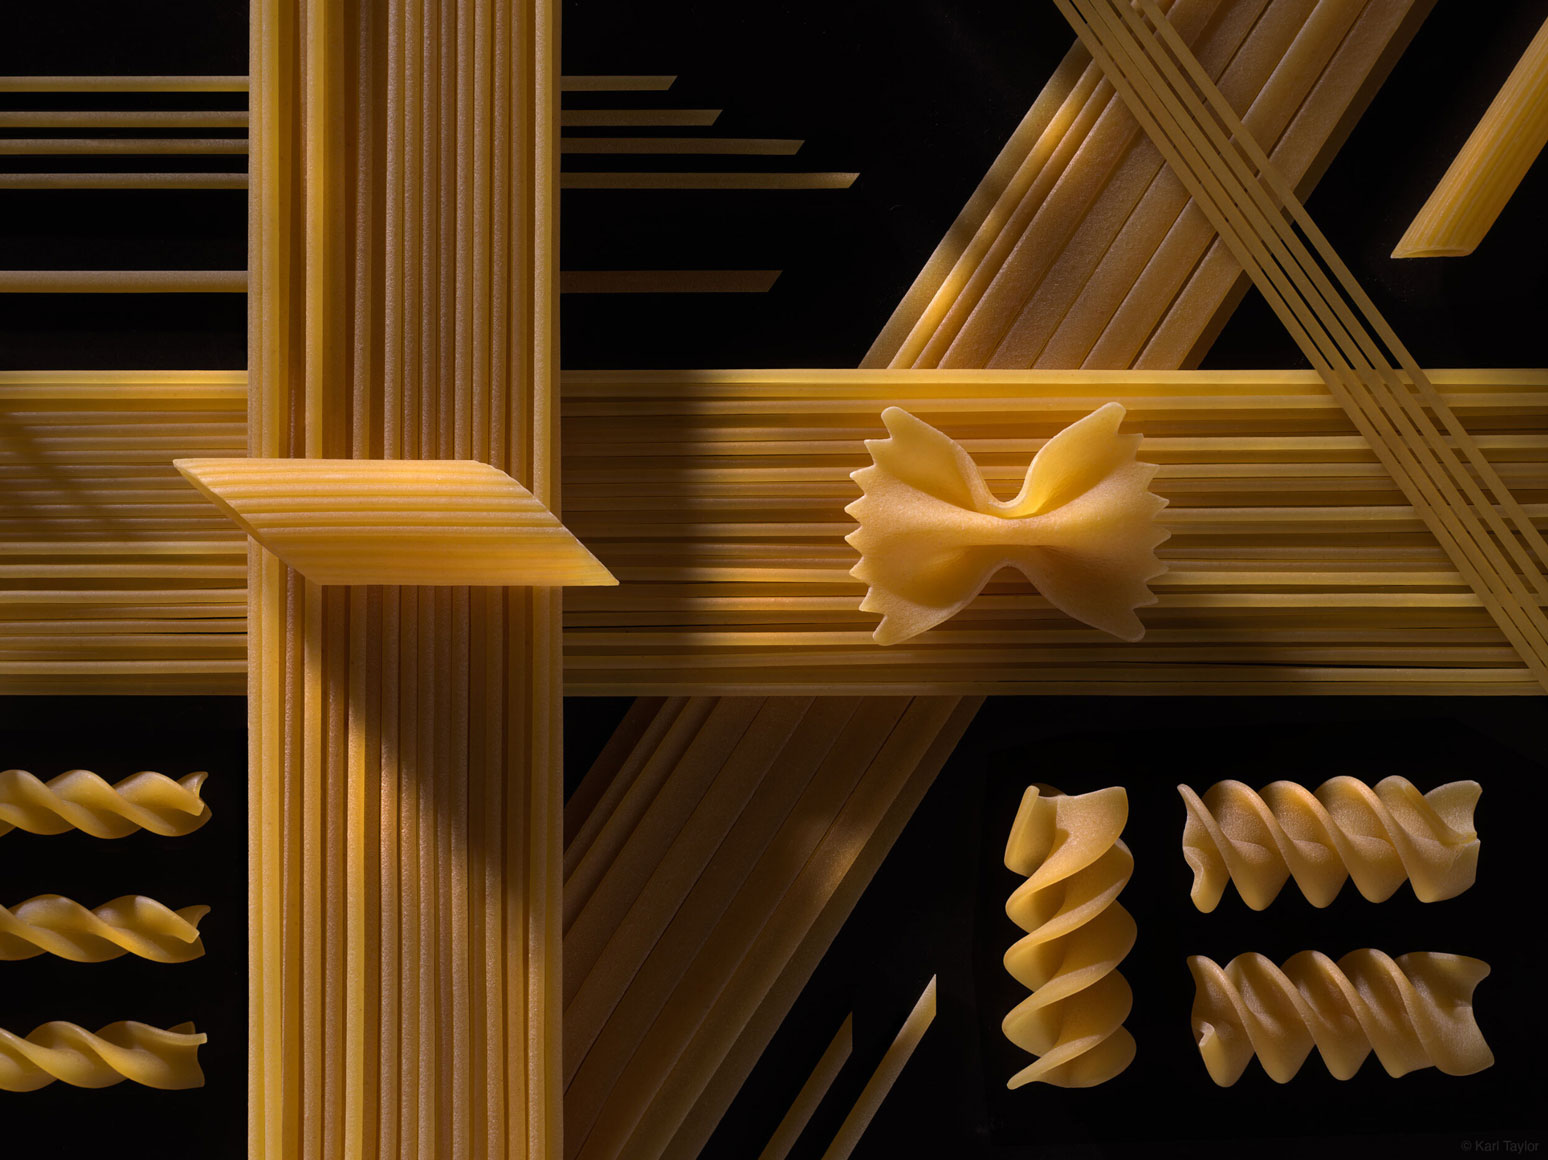 Still life image of pasta arranged on a dark background with moody shadow lighting